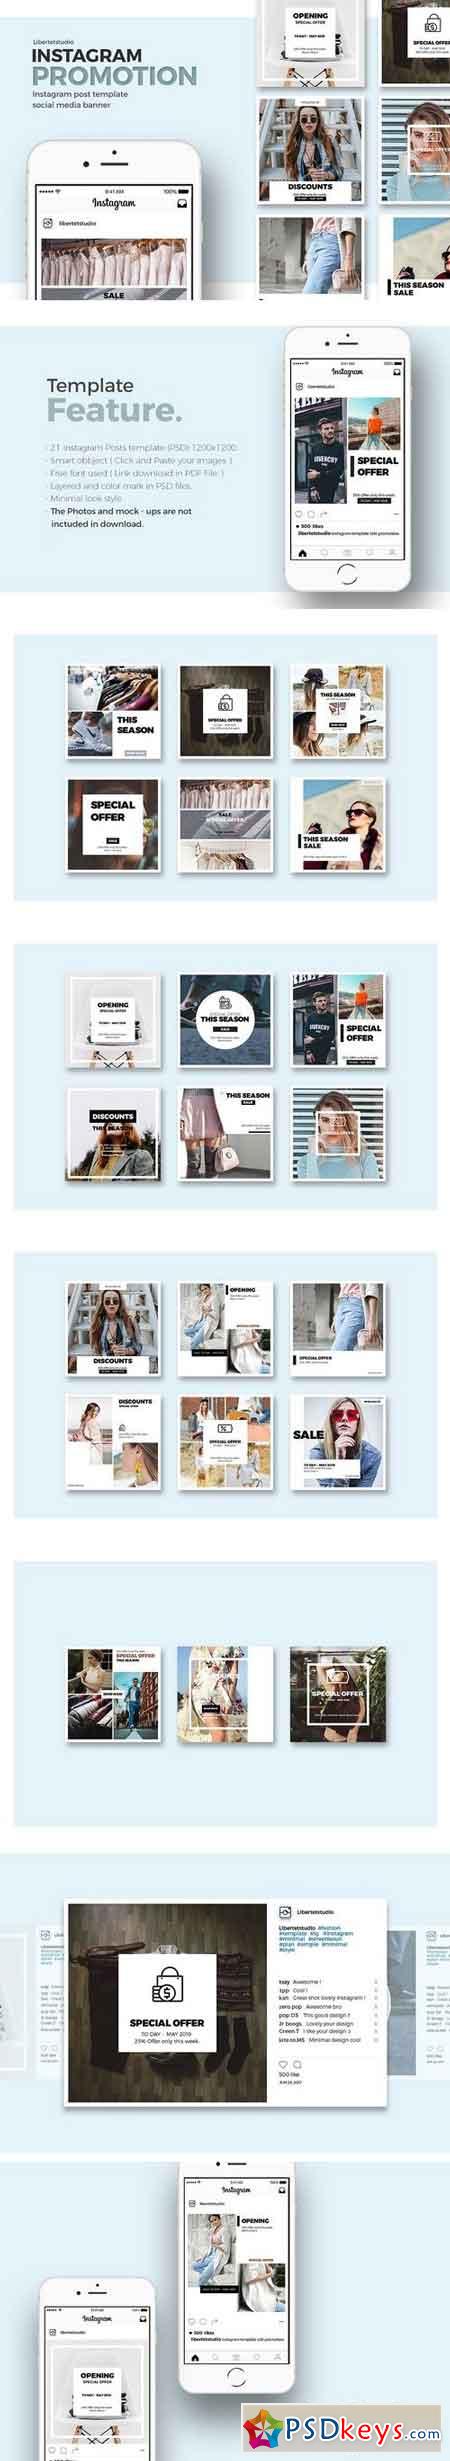 INSTAGRAM PROMOTION POST TEMPLATE 2030248